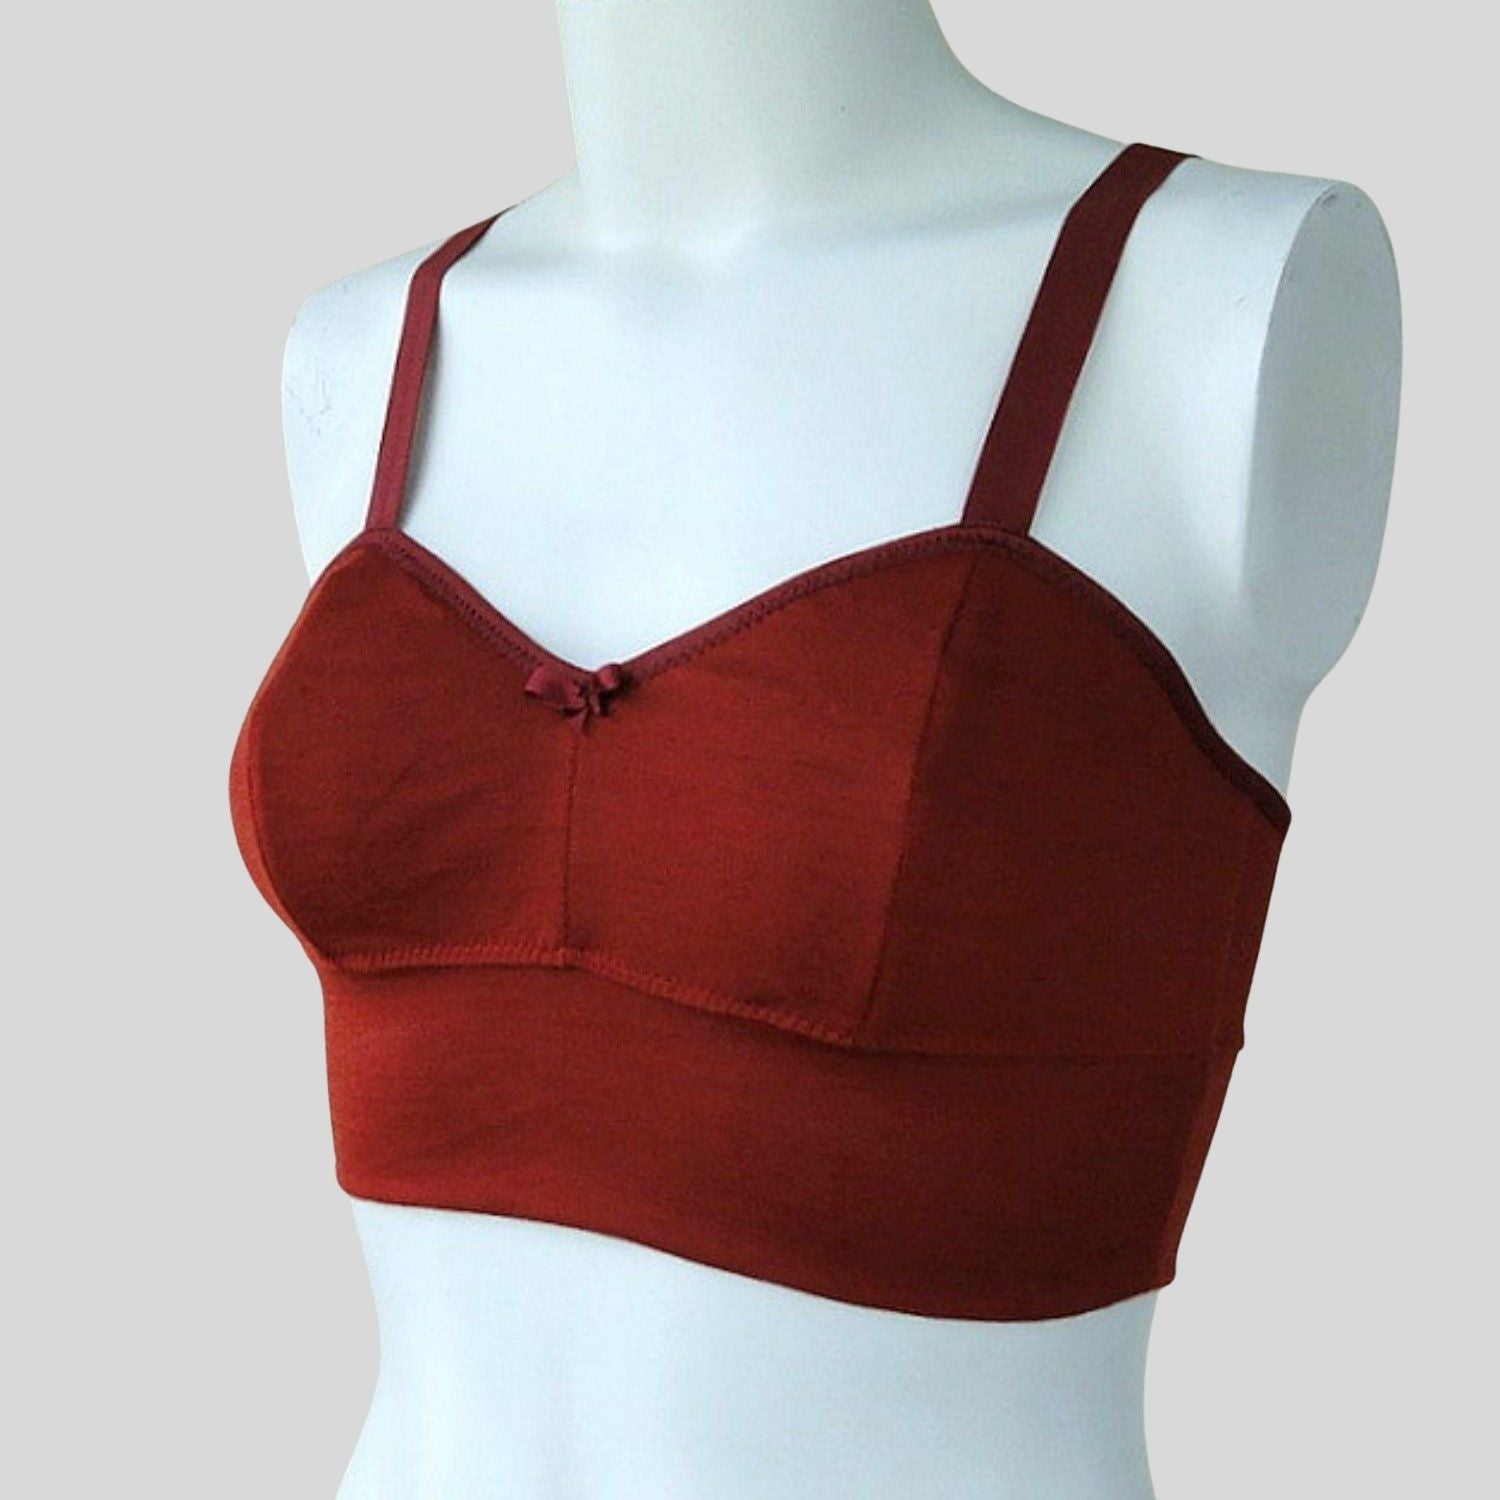 Merino Wool Supportive Sports Bra - Royal Cherry Red❤️ menique